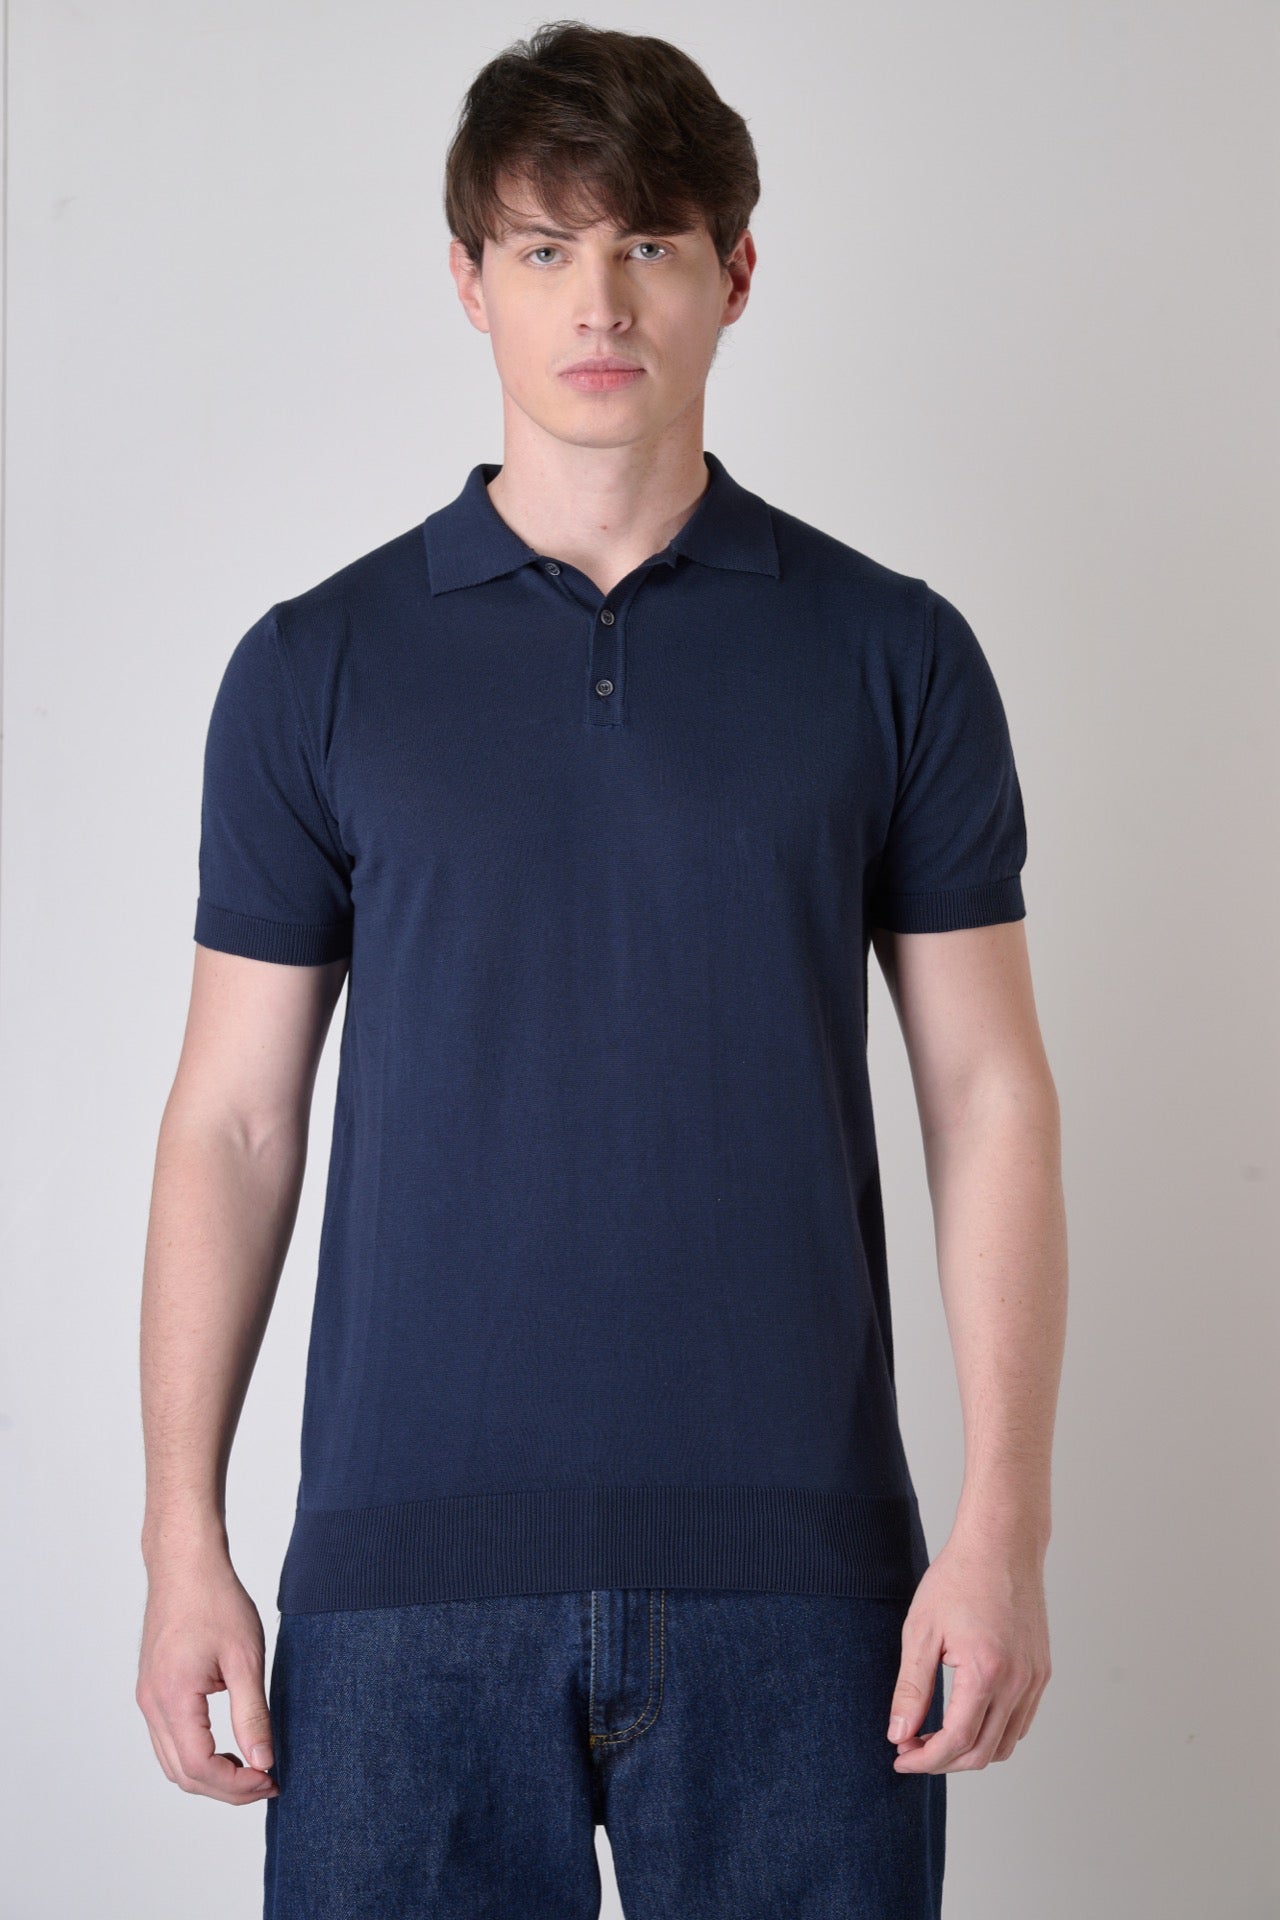 Blue pure cotton knitted polo shirt